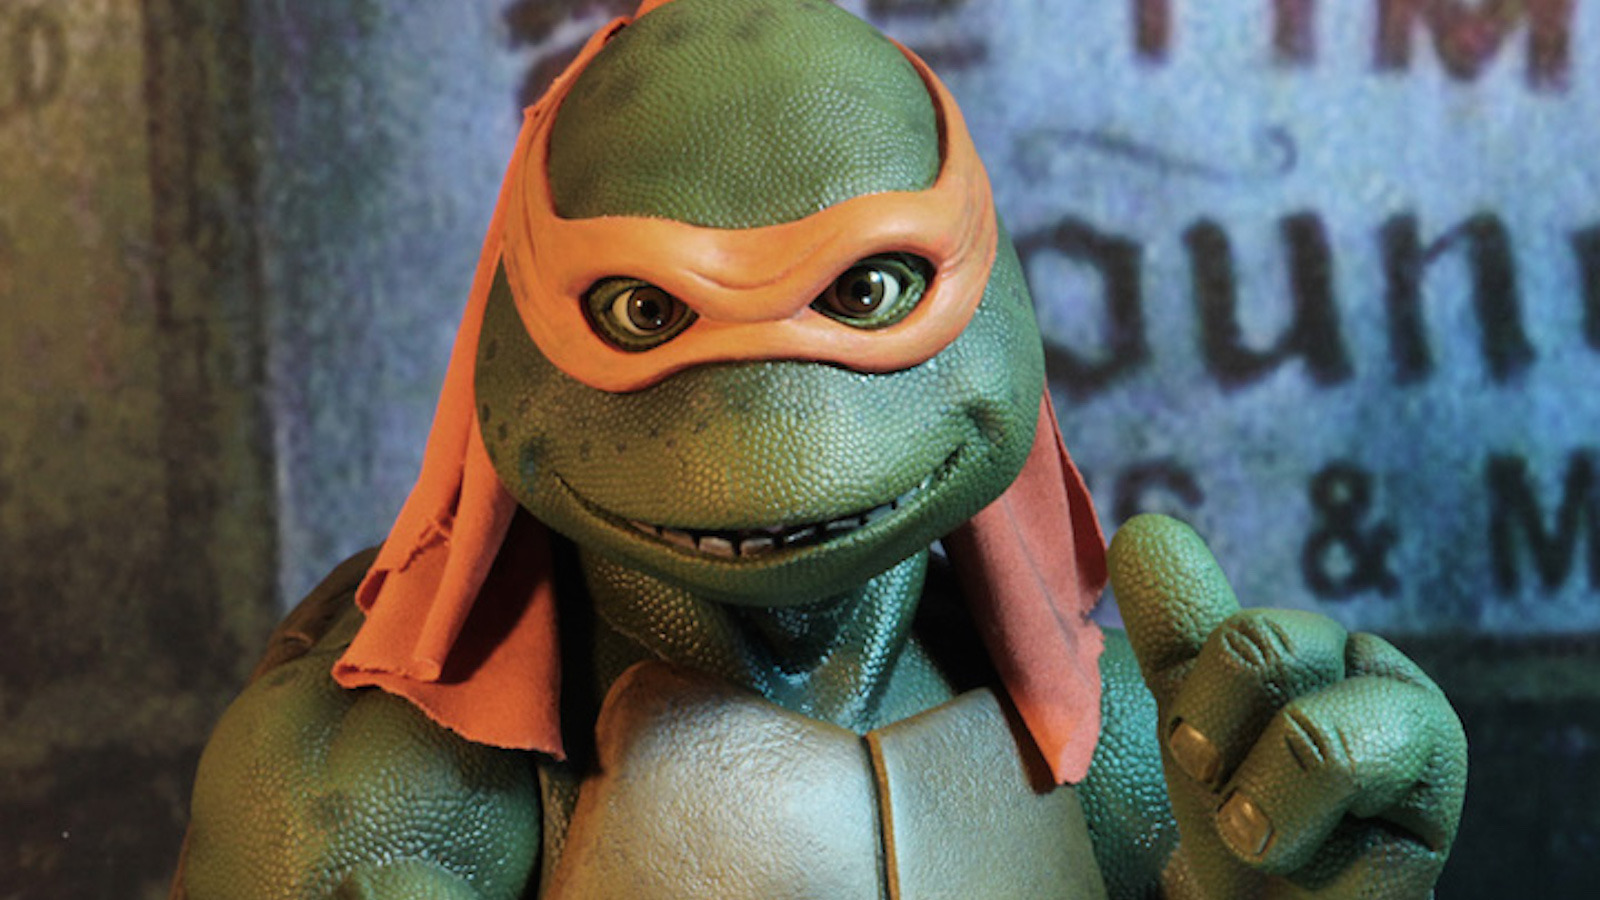 https://www.looper.com/img/gallery/heres-how-you-can-watch-every-movie-in-the-teenage-mutant-ninja-turtles-trilogy/l-intro-1611412254.jpg